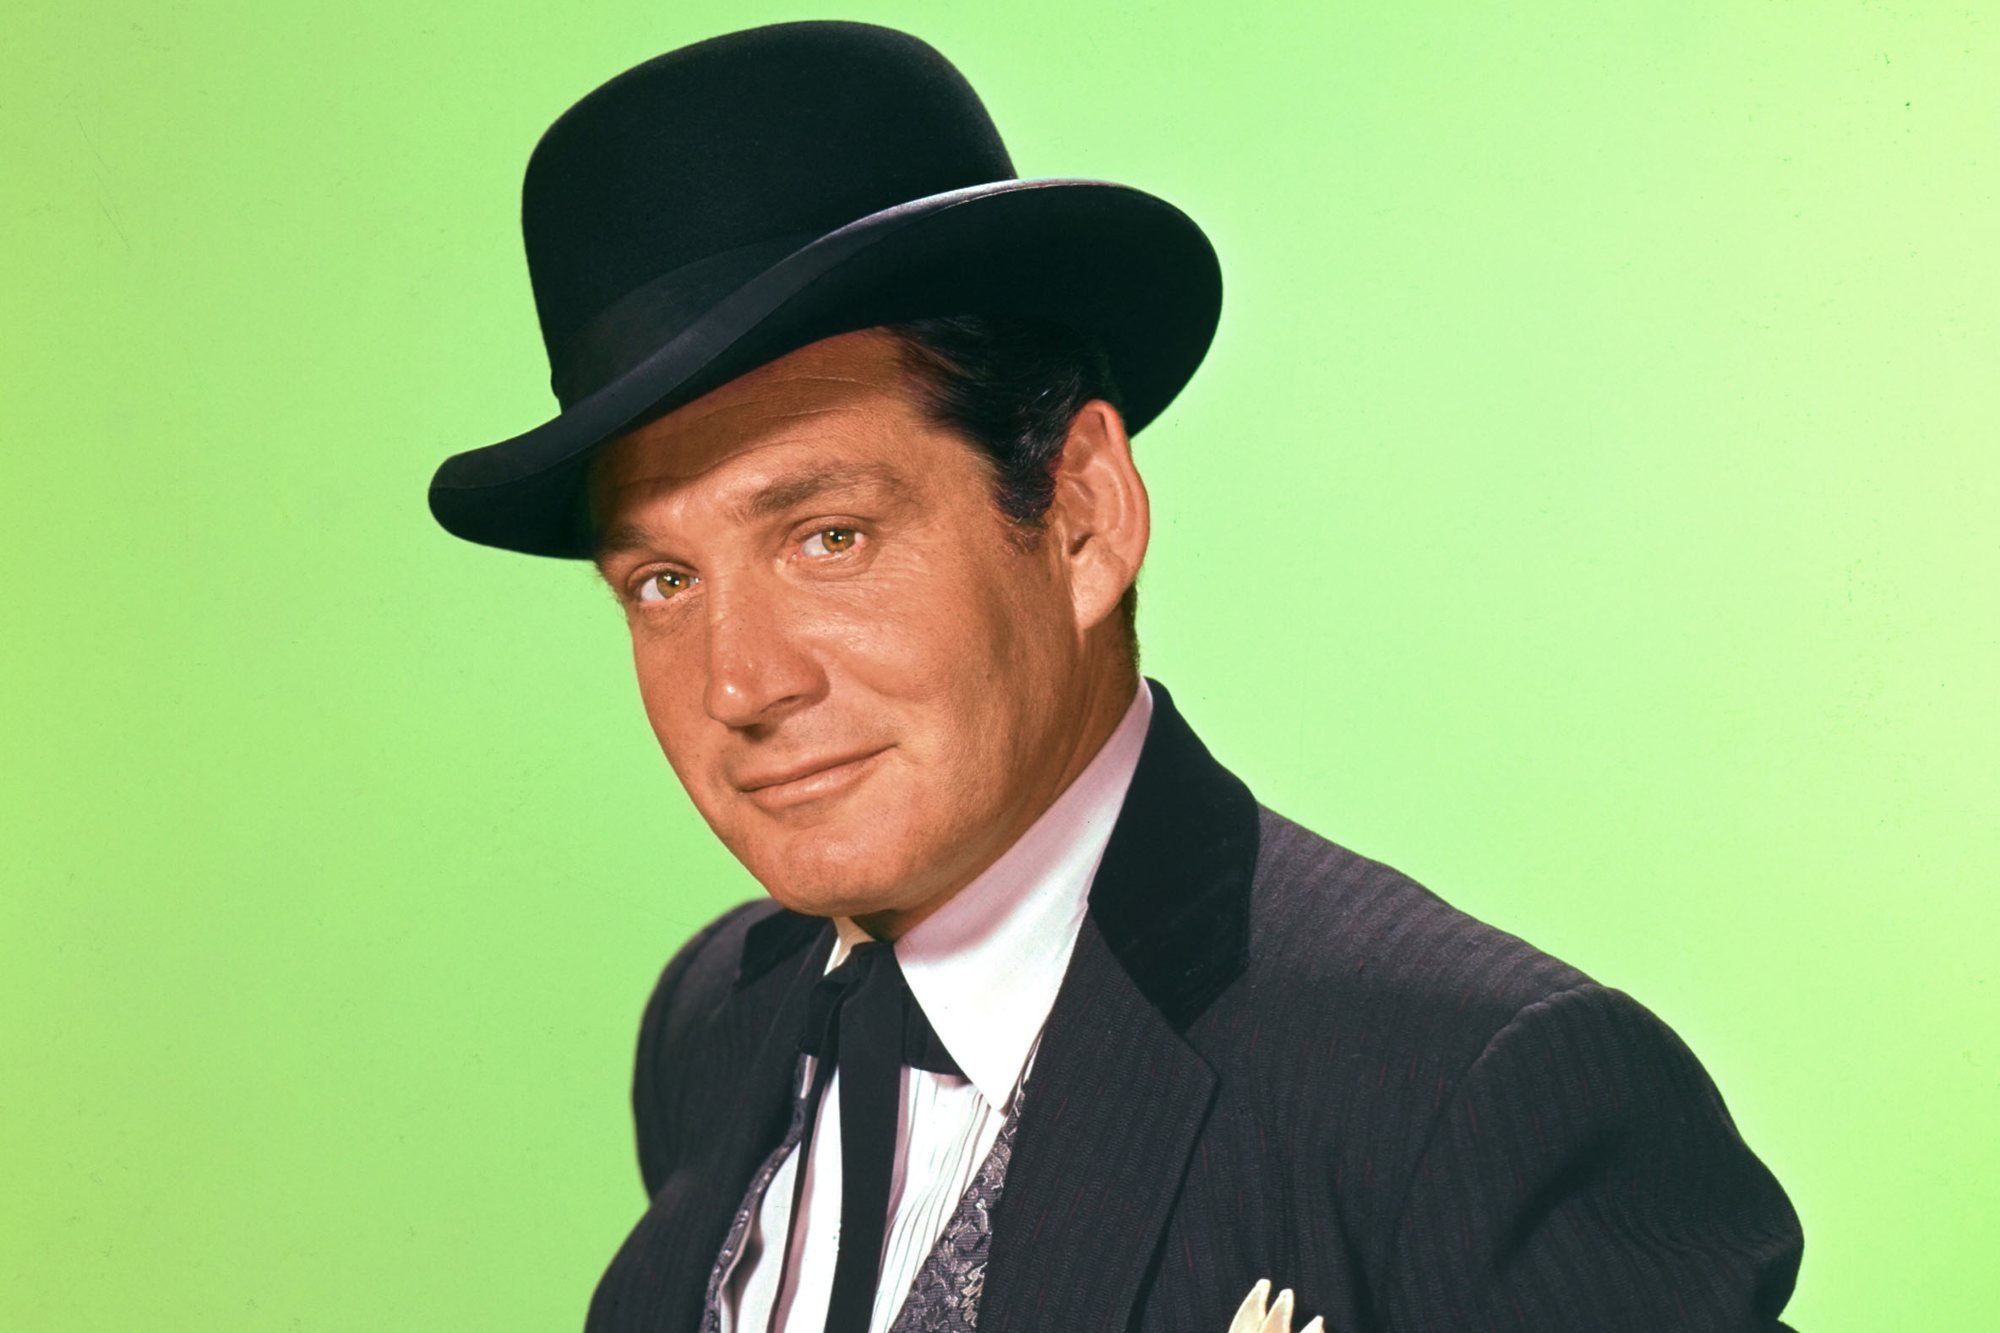 'Bat Masterson' Gene Barry as Bat Masterson smiling in front of a green background.